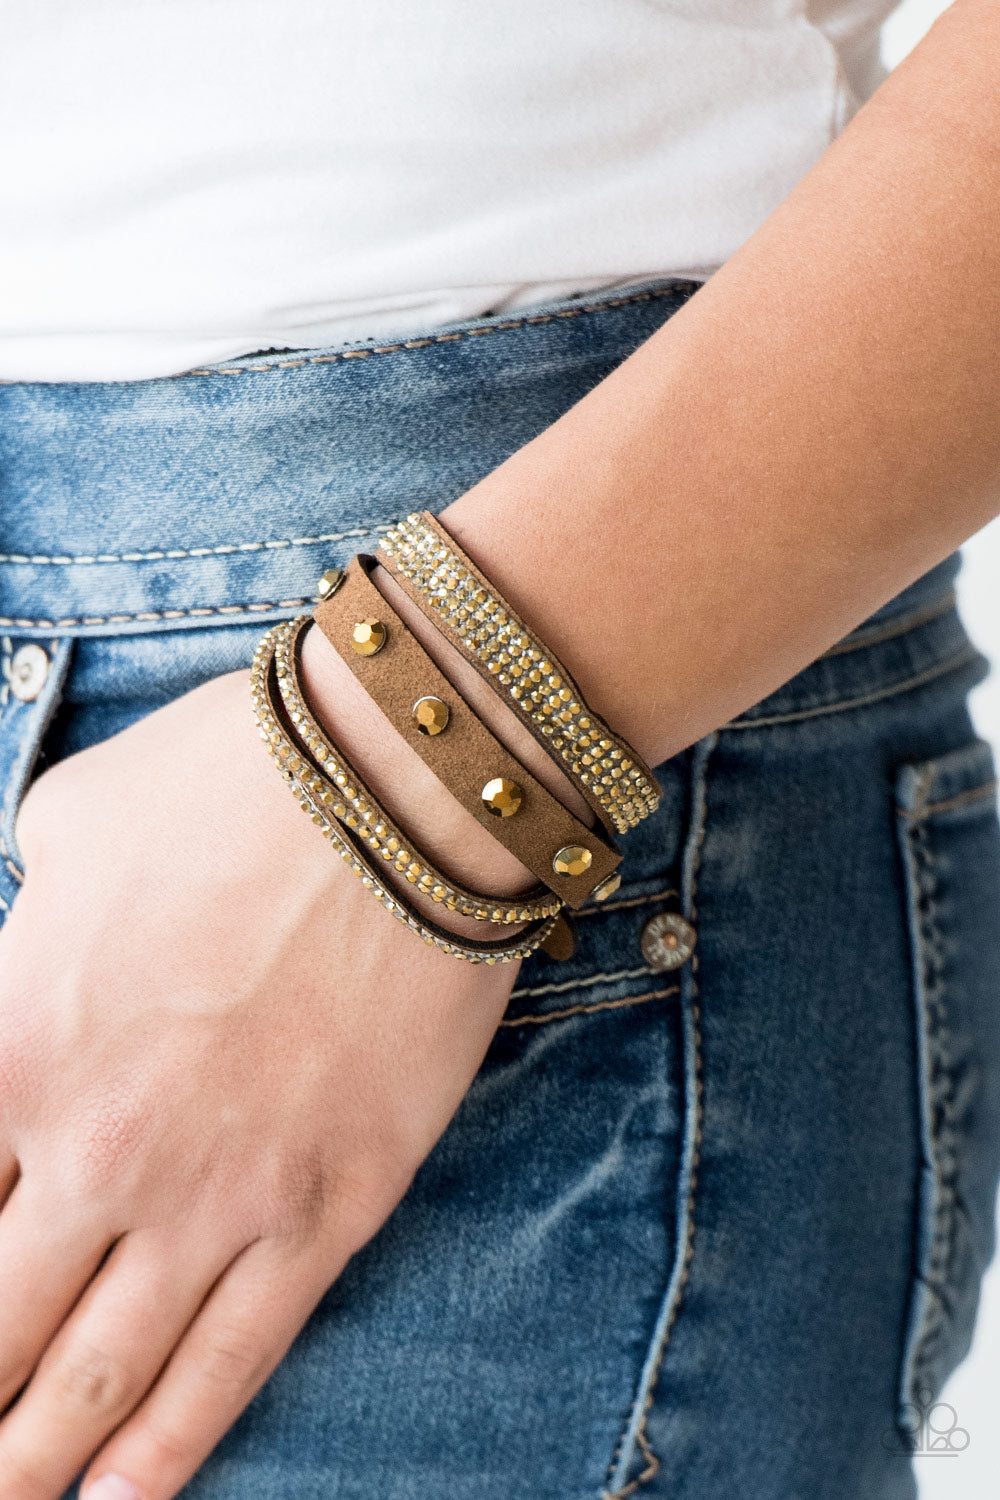 Totally Rockable - Brass and Brown Wrap Bracelet - Paparazzi Accessories - Brown suede is encrusted in sections of glittery aurum rhinestones for a sassy look. The band double wraps around the wrist for a fierce one-of-a-kind look. Features an adjustable snap closure.